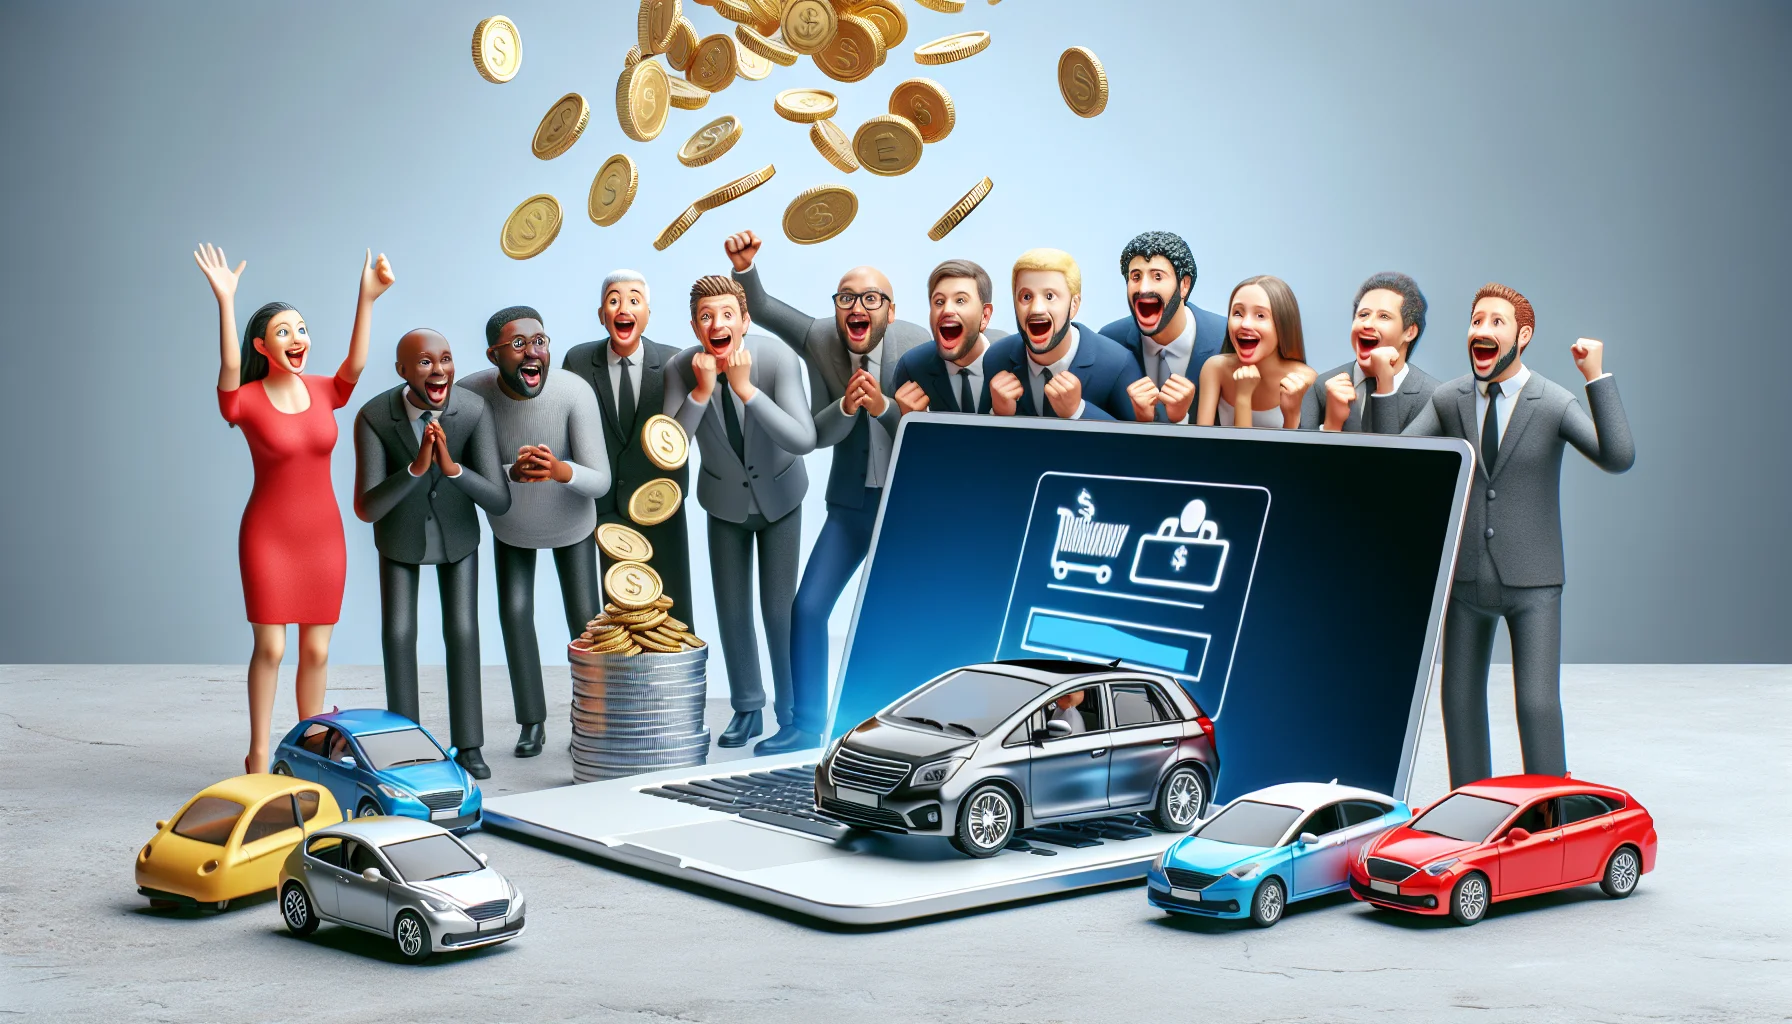 Create a humorous and realistic image representing a fictional car-sharing affiliate program, enticingly connected to the concept of making money online. Picture a scene with an animated laptop screen displaying coins pouring out, symbolizing online earnings. Next to the laptop, lay a set of miniature car models, illustrating the car-sharing facet of the program. Around the scene, place individuals of diverse descents such as Caucasian, Hispanic, and Black, all with excited expressions, representing the wide appeal of this online opportunity.